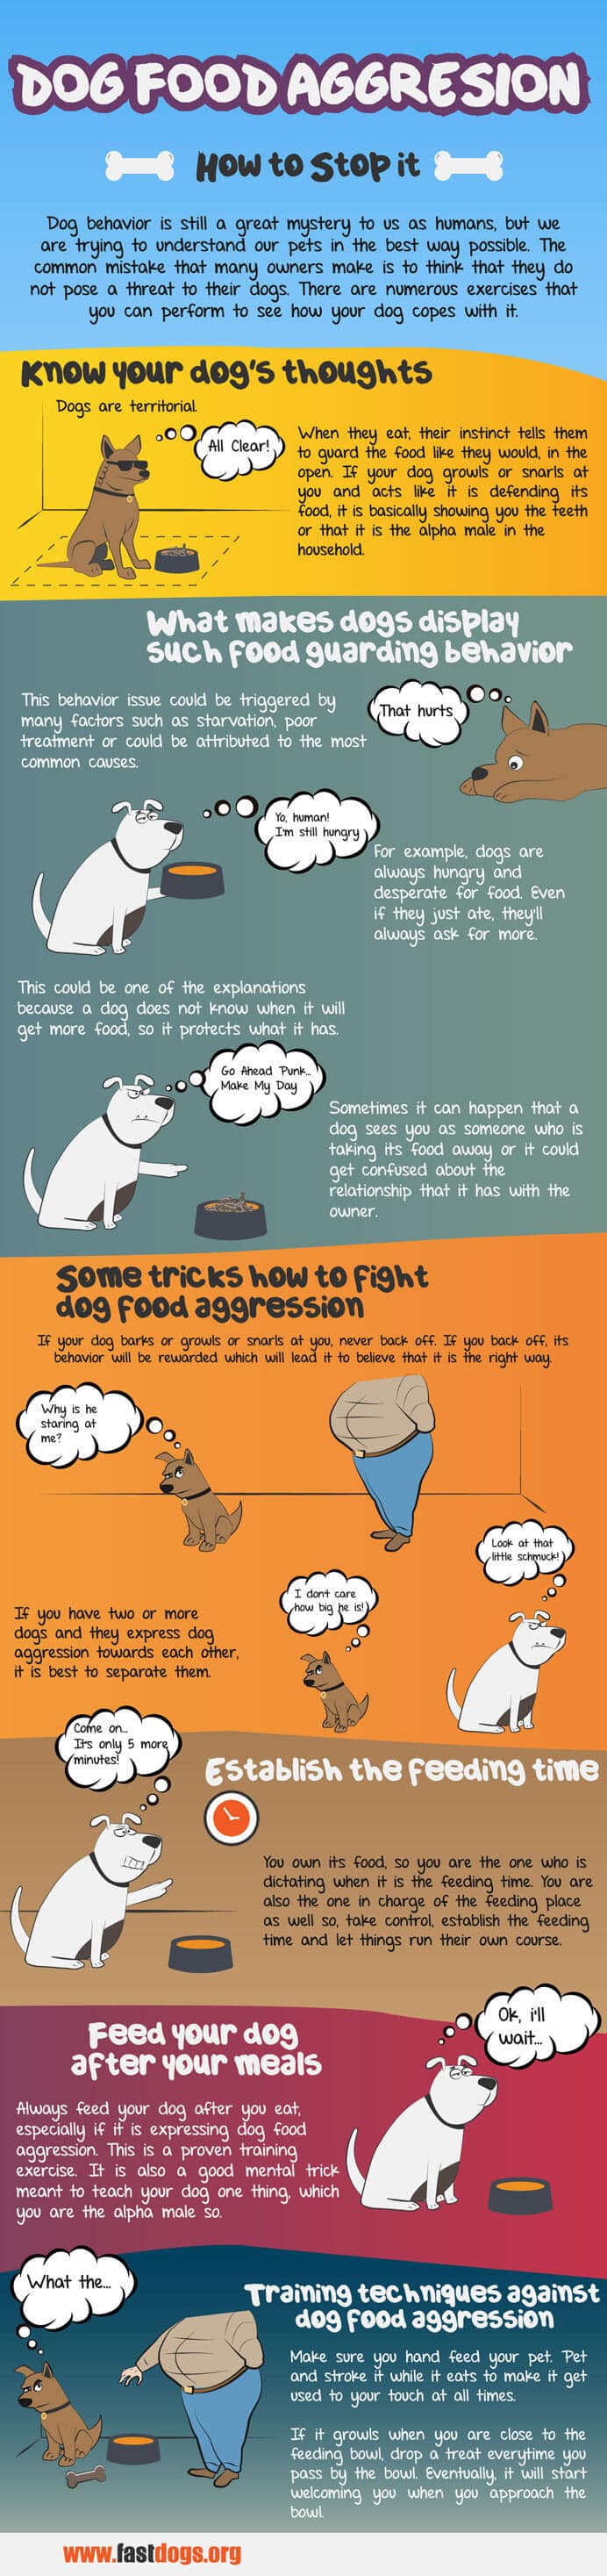 dog food aggression infographic